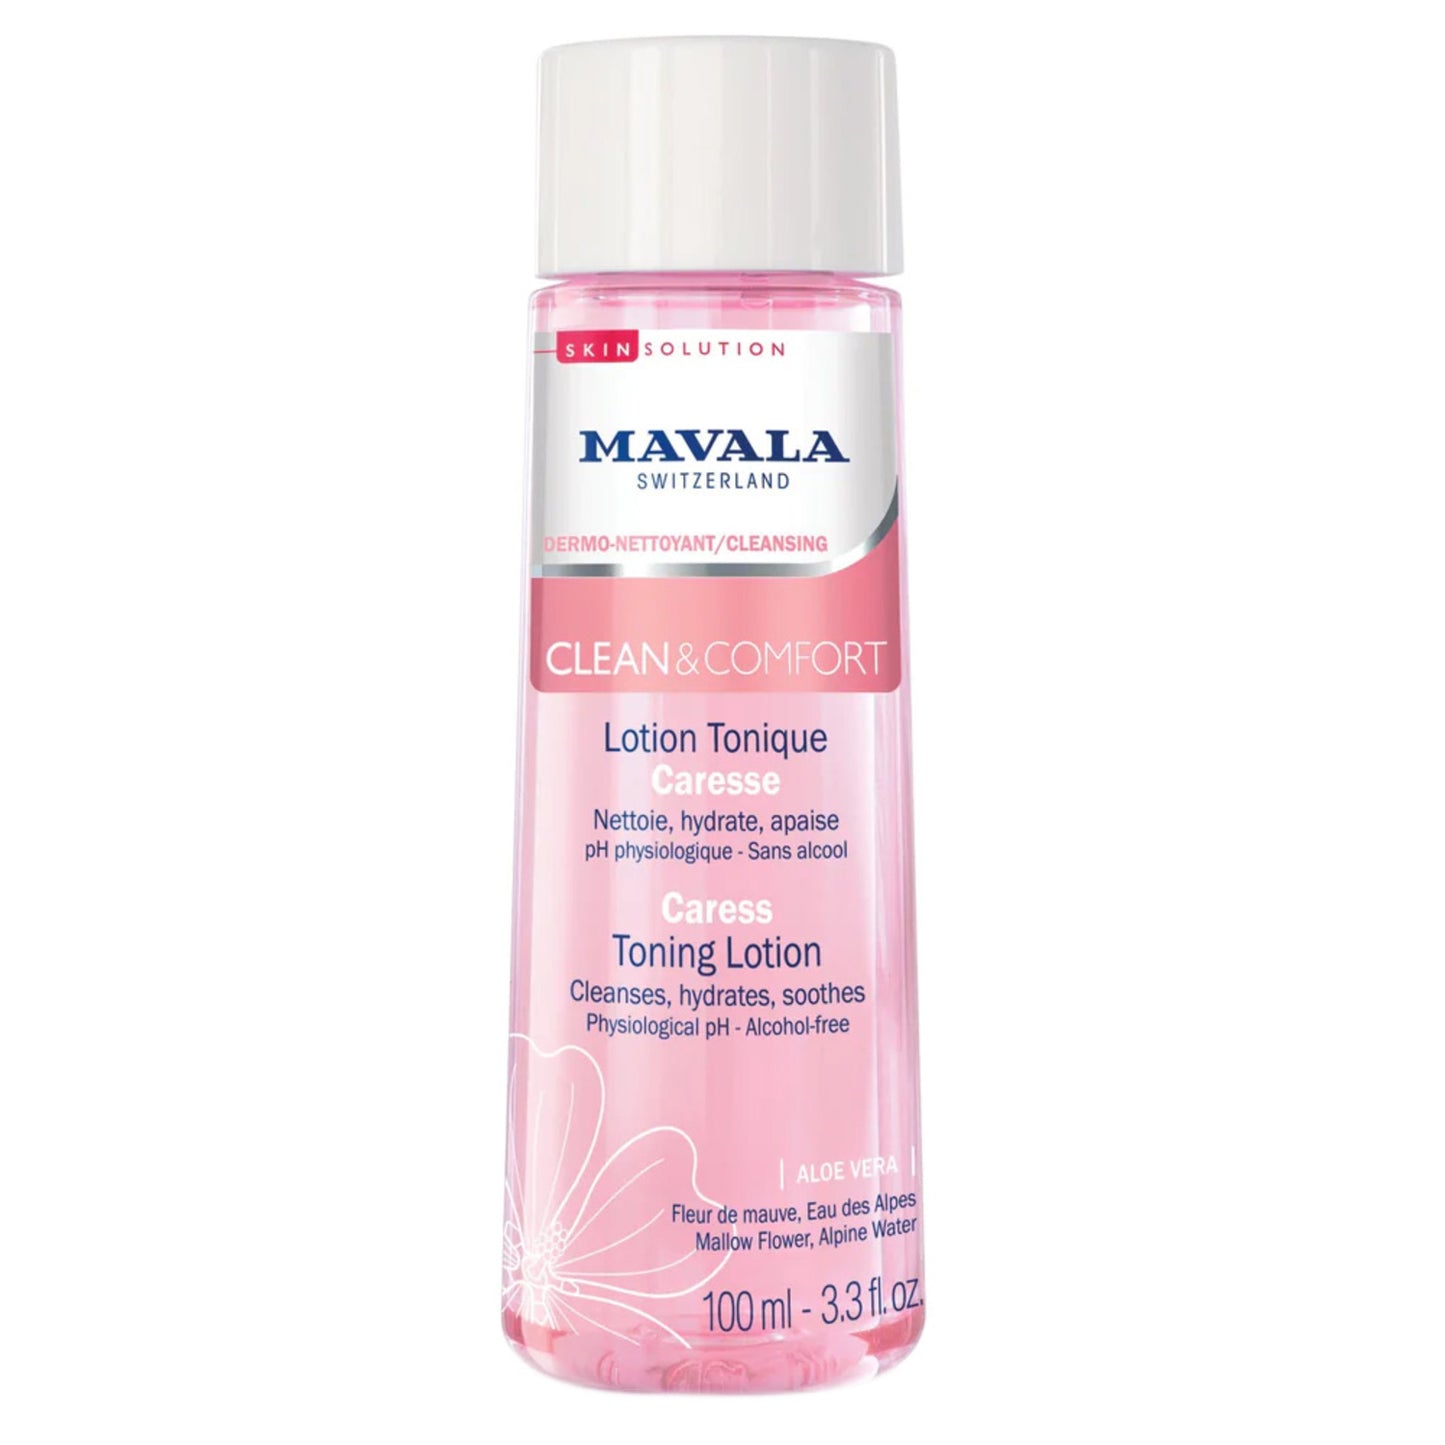 MAVALA Skin Solution Clean and Comfort Caress Toning Lotion